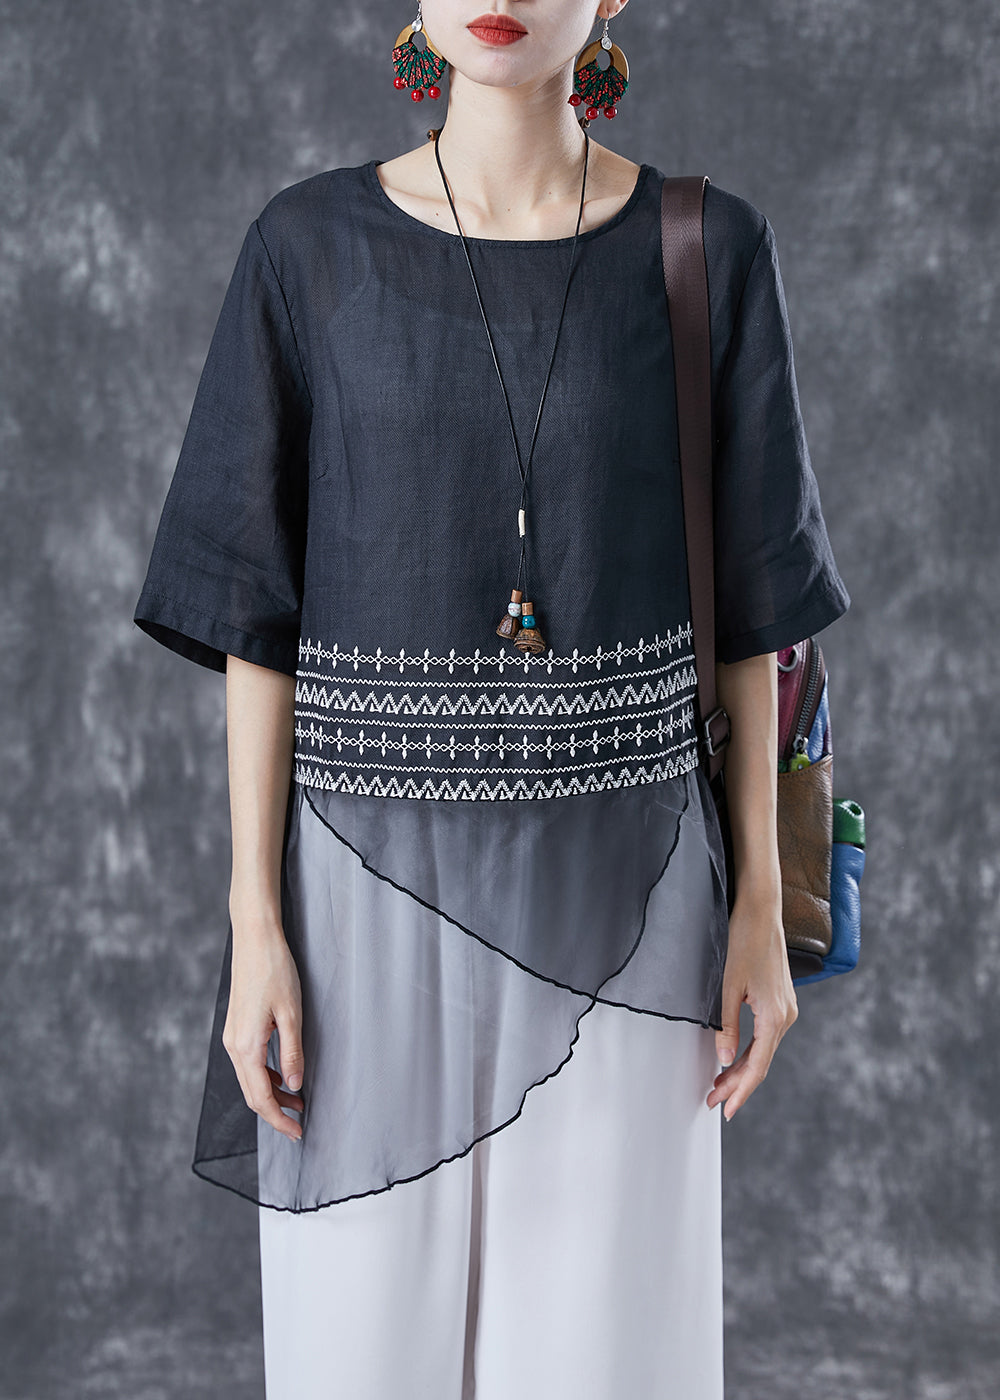 Elegant Black Embroideried Tulle Patchwork Linen Top Summer LY4078 - fabuloryshop